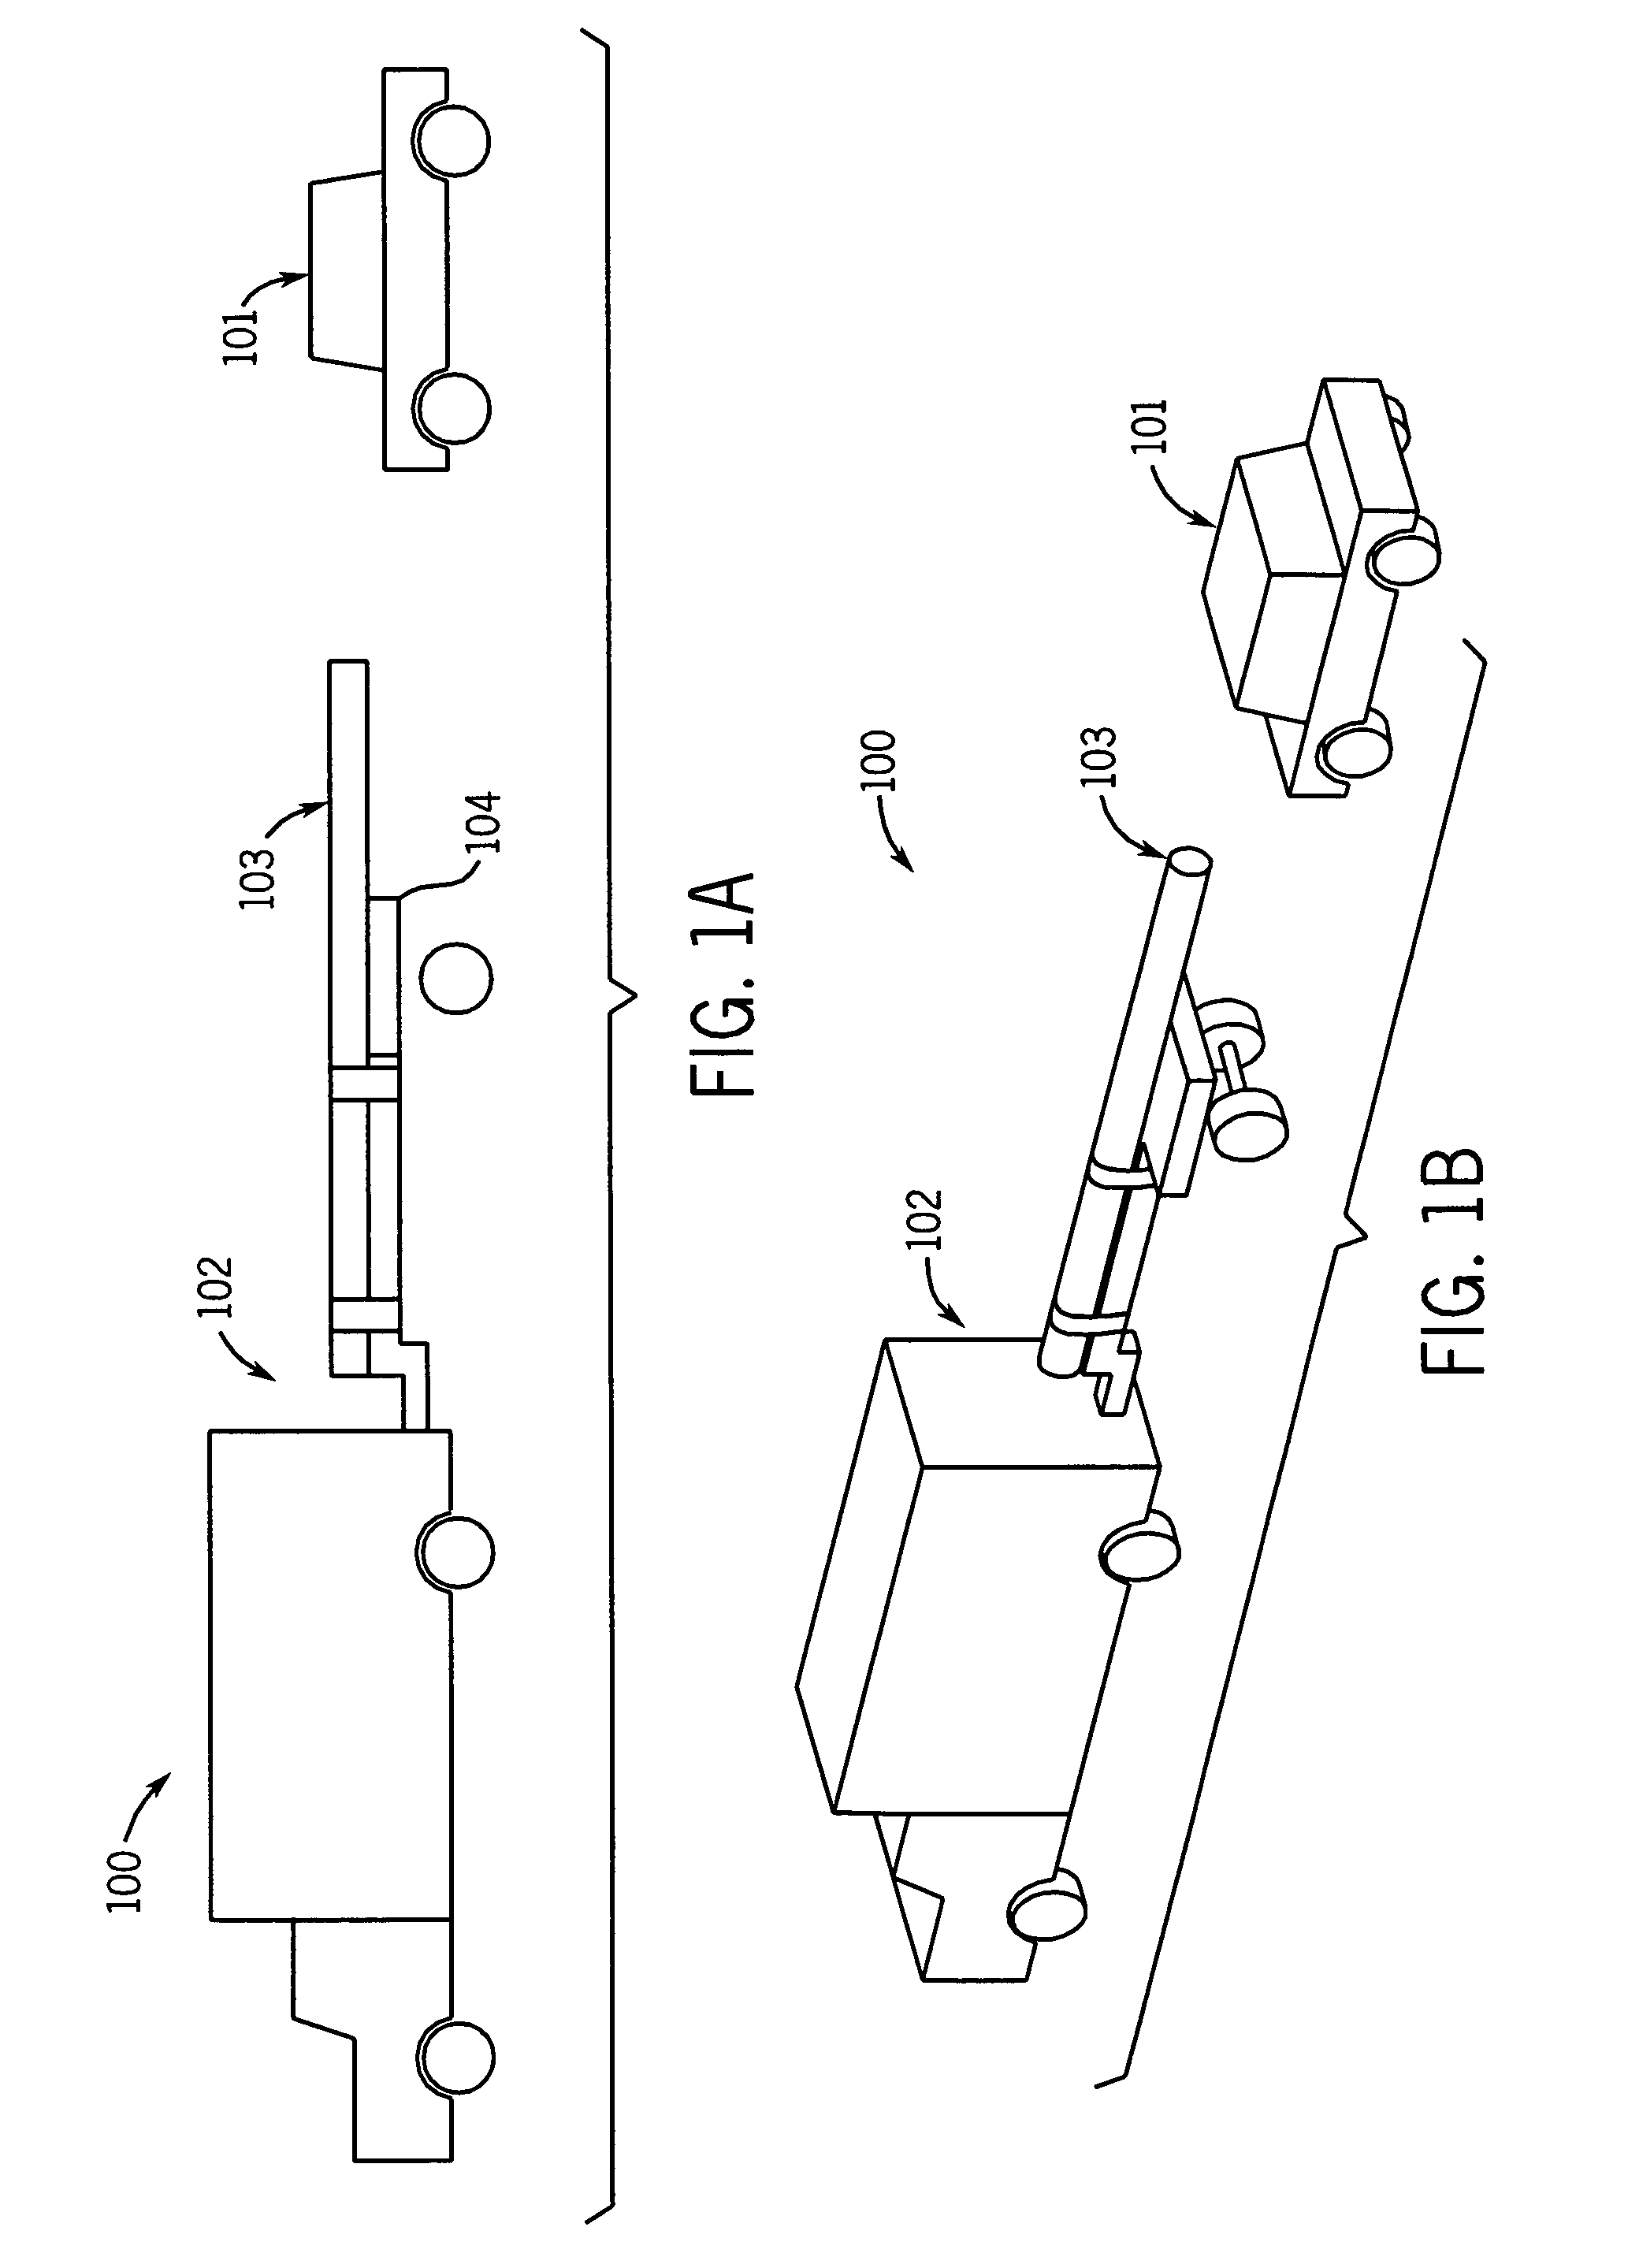 Collision barrier device for projecting loads